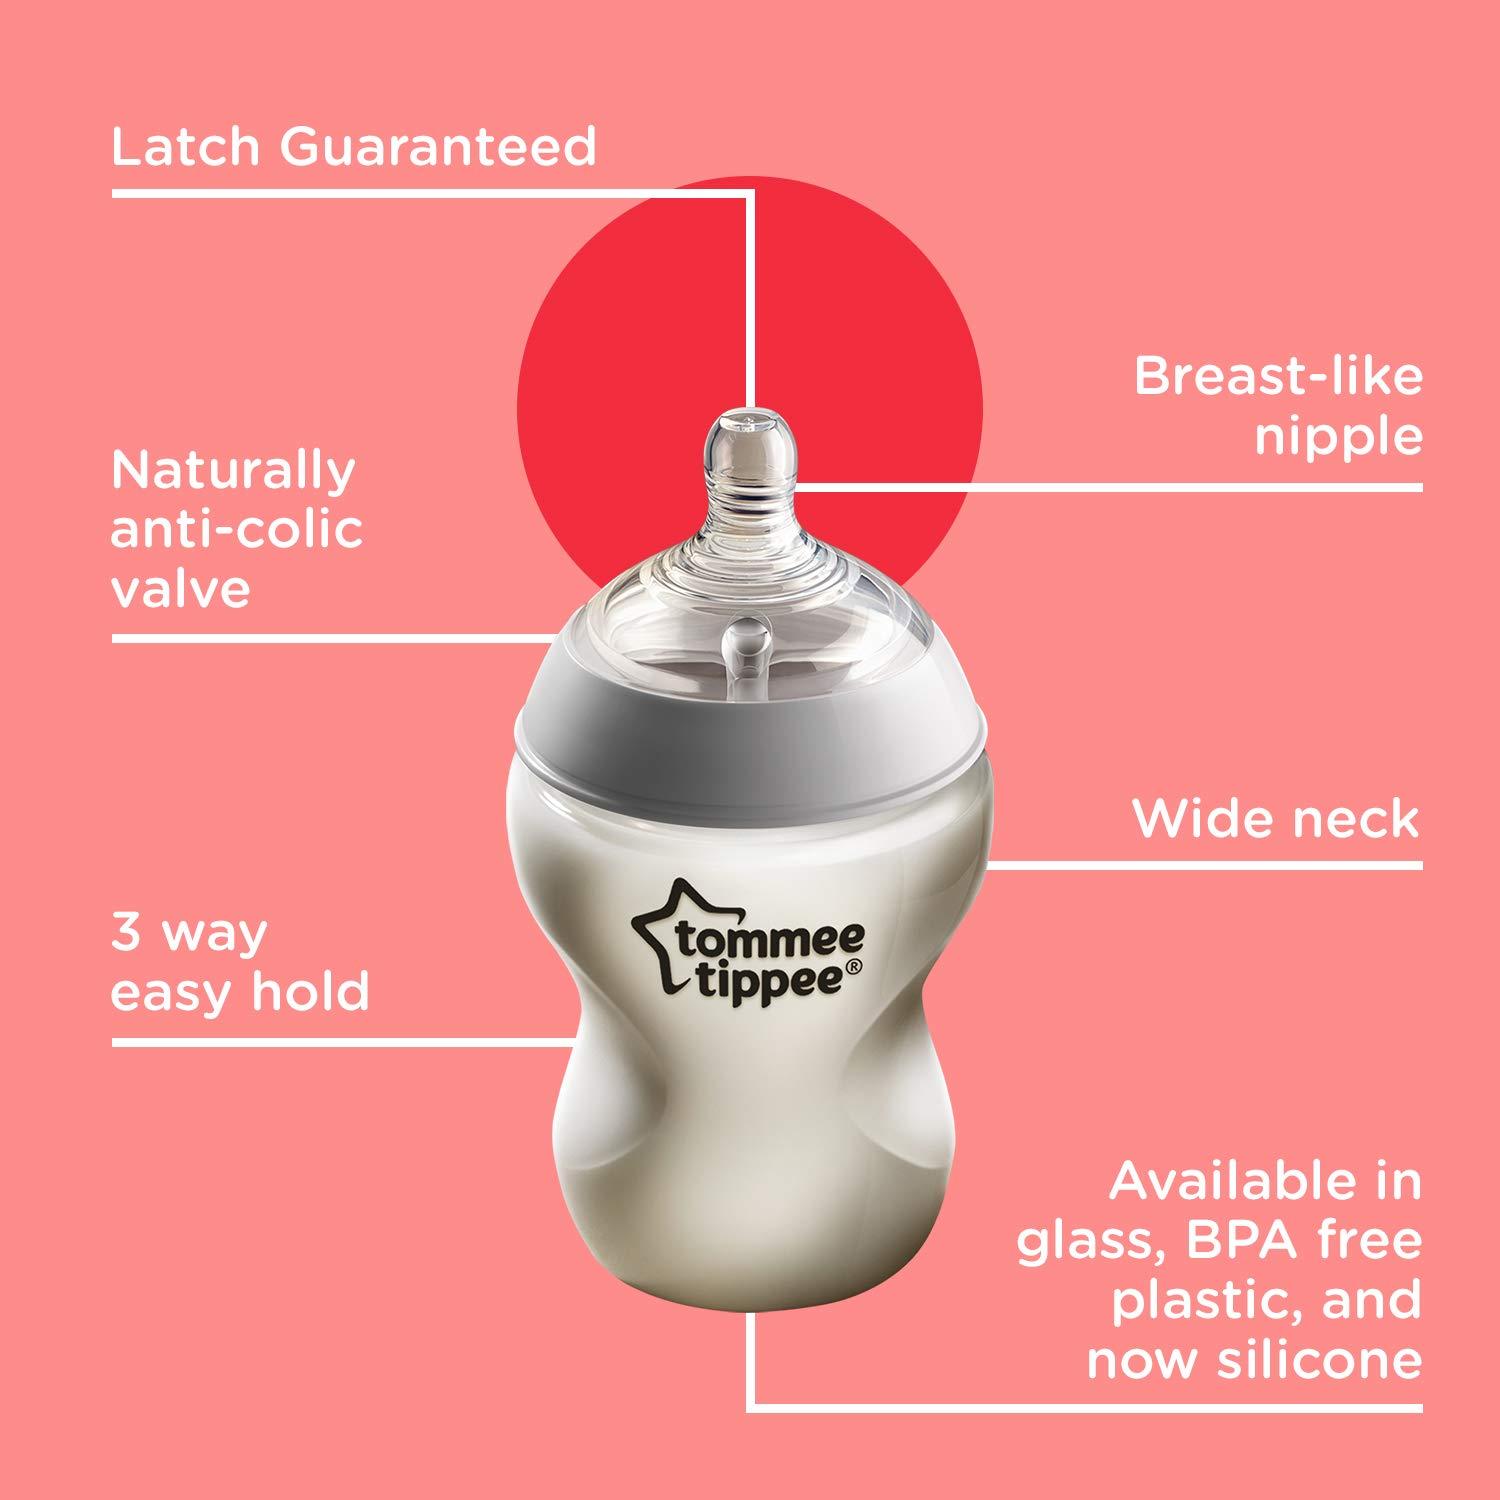 Tommee Tippee Breast Feeding Starter Set, Product View